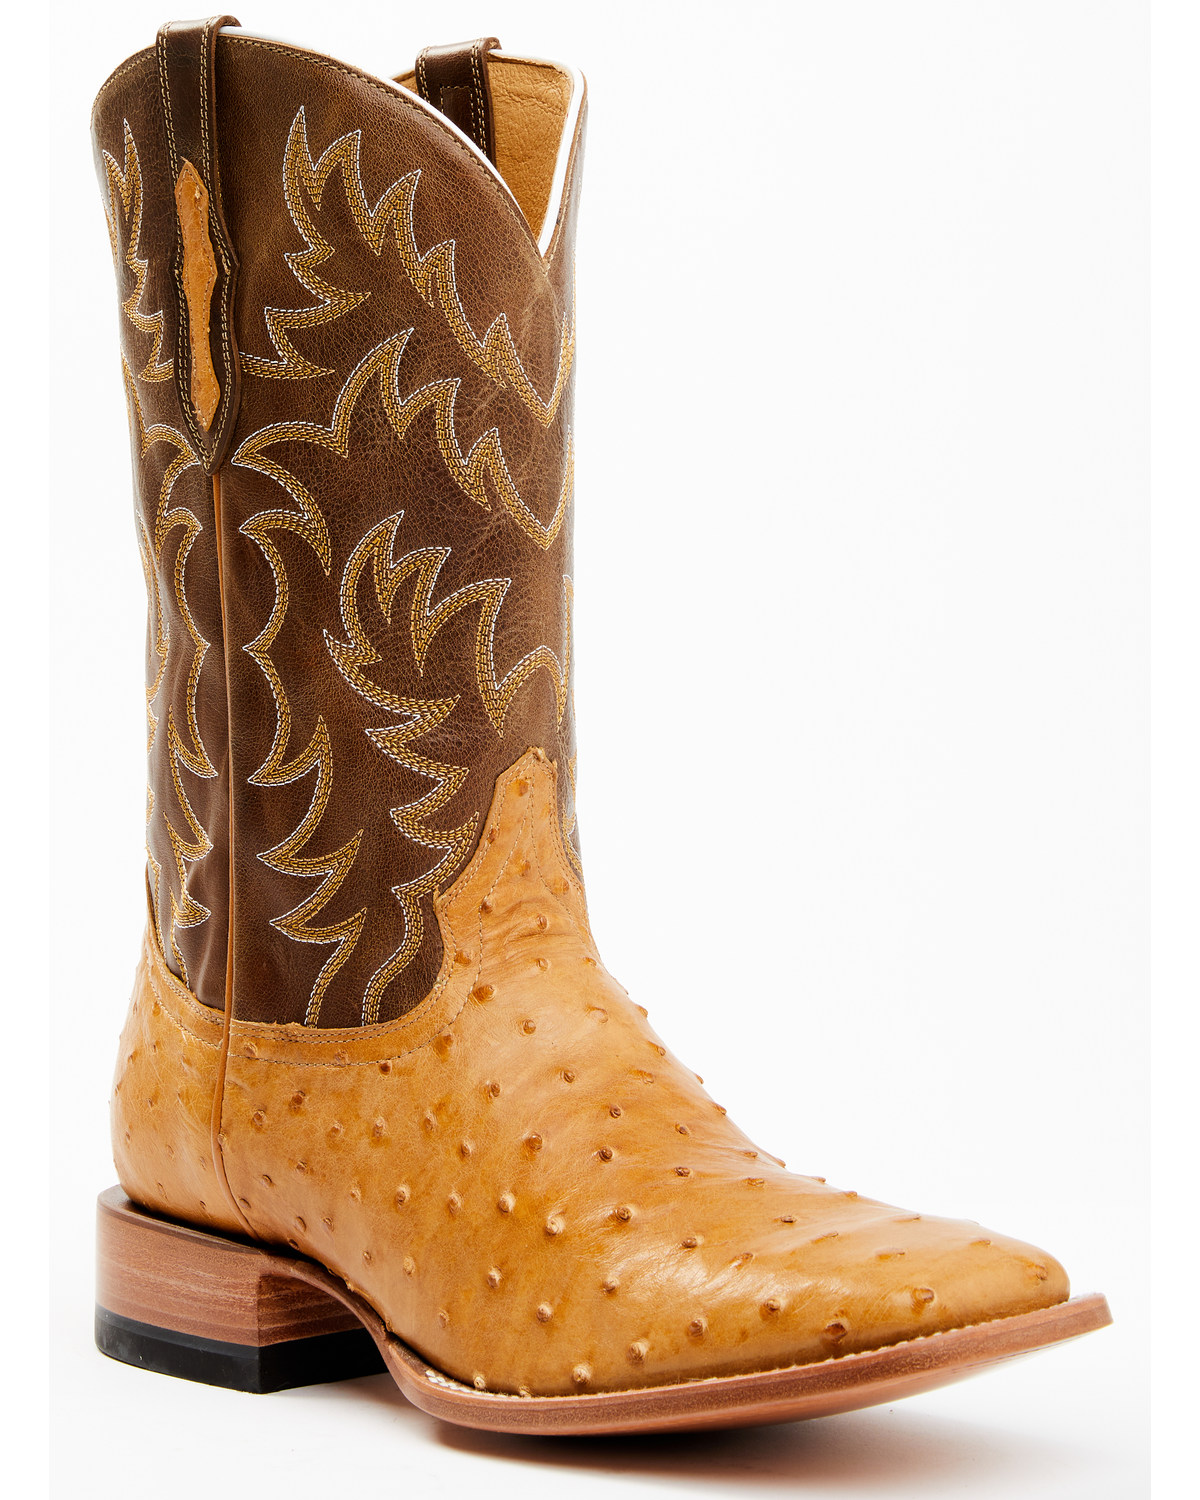 Cody James Men's Full-Quill Ostrich Exotic Western Boots - Broad Square Toe